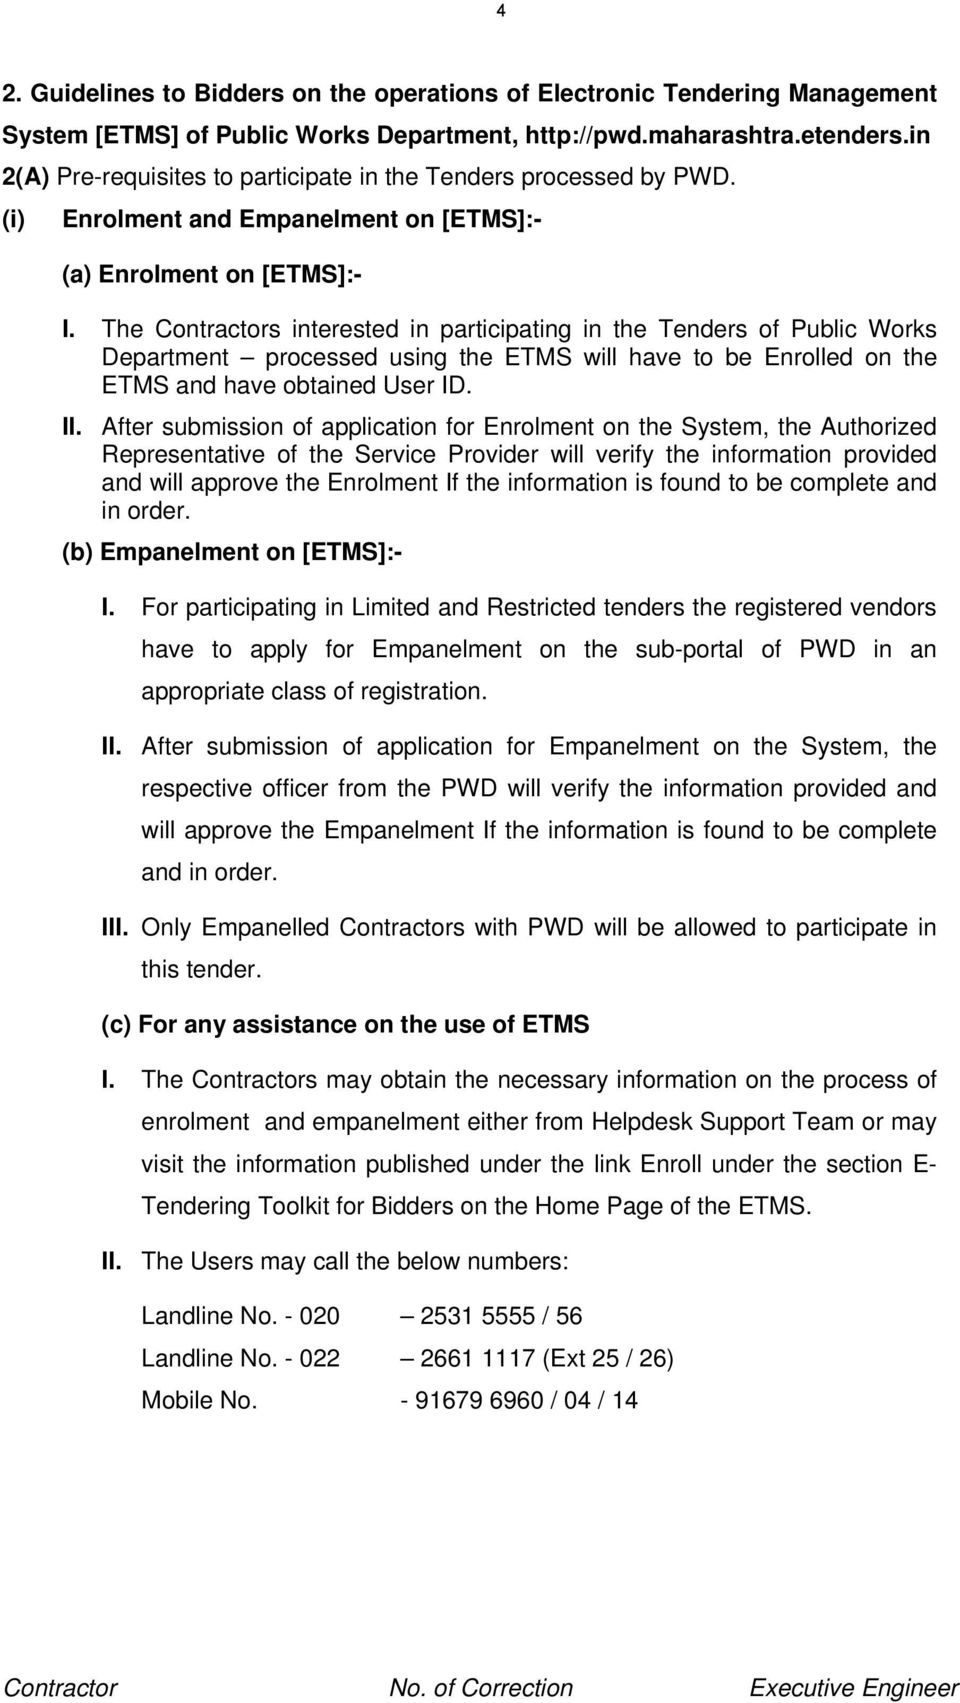 The Contractors interested in participating in the Tenders of Public Works Department processed using the ETMS will have to be Enrolled on the ETMS and have obtained User ID. II.